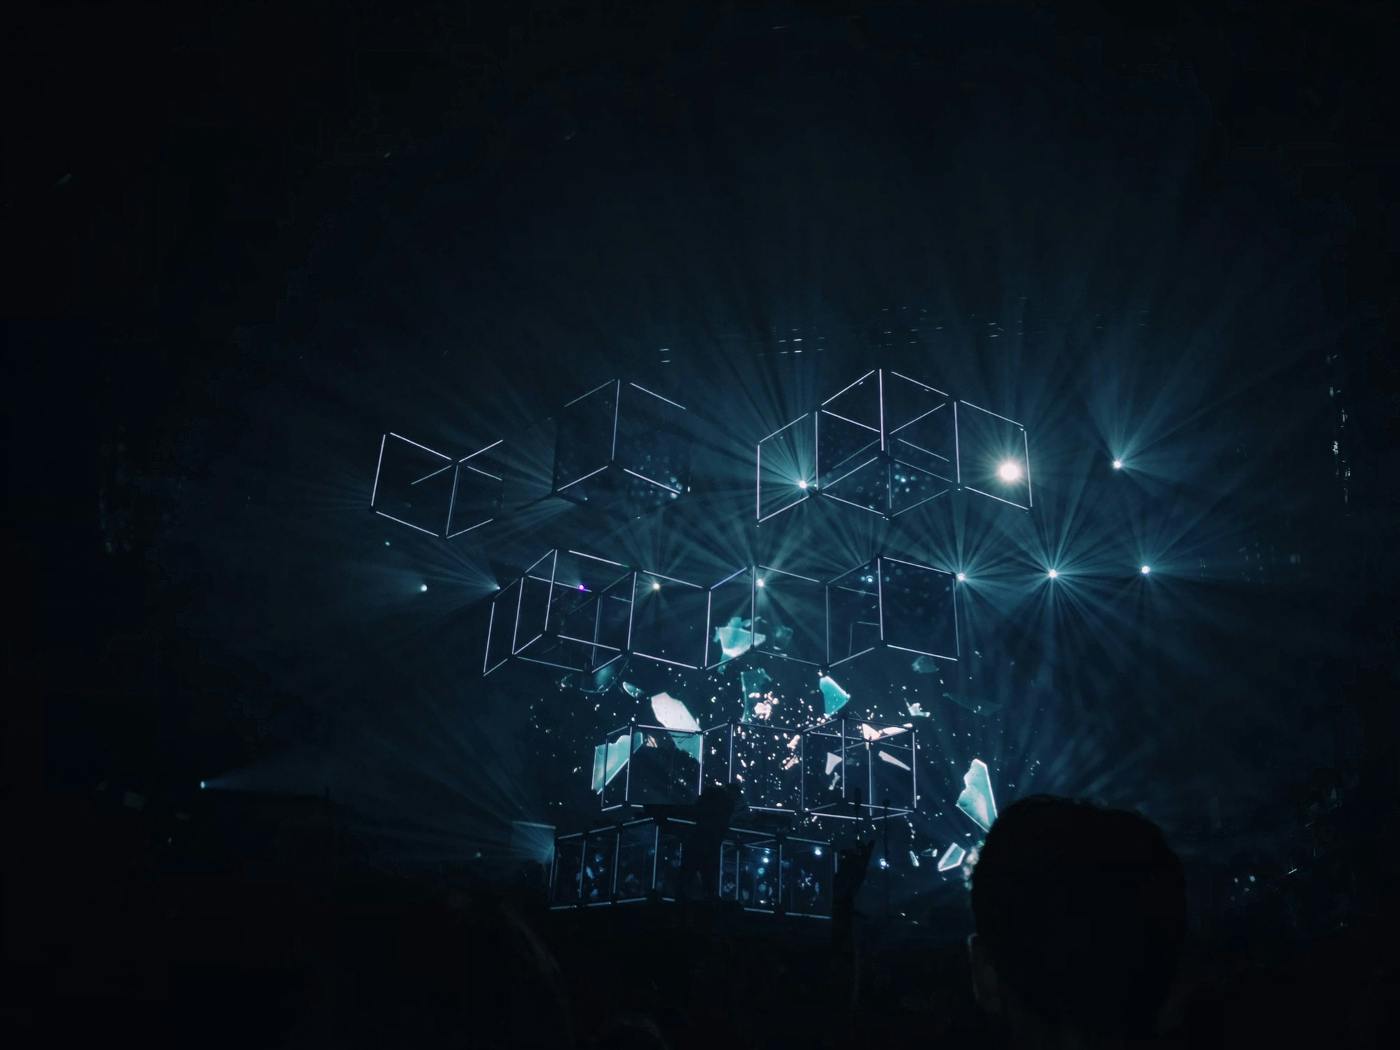 Geometric shapes projected on a dark ceiling